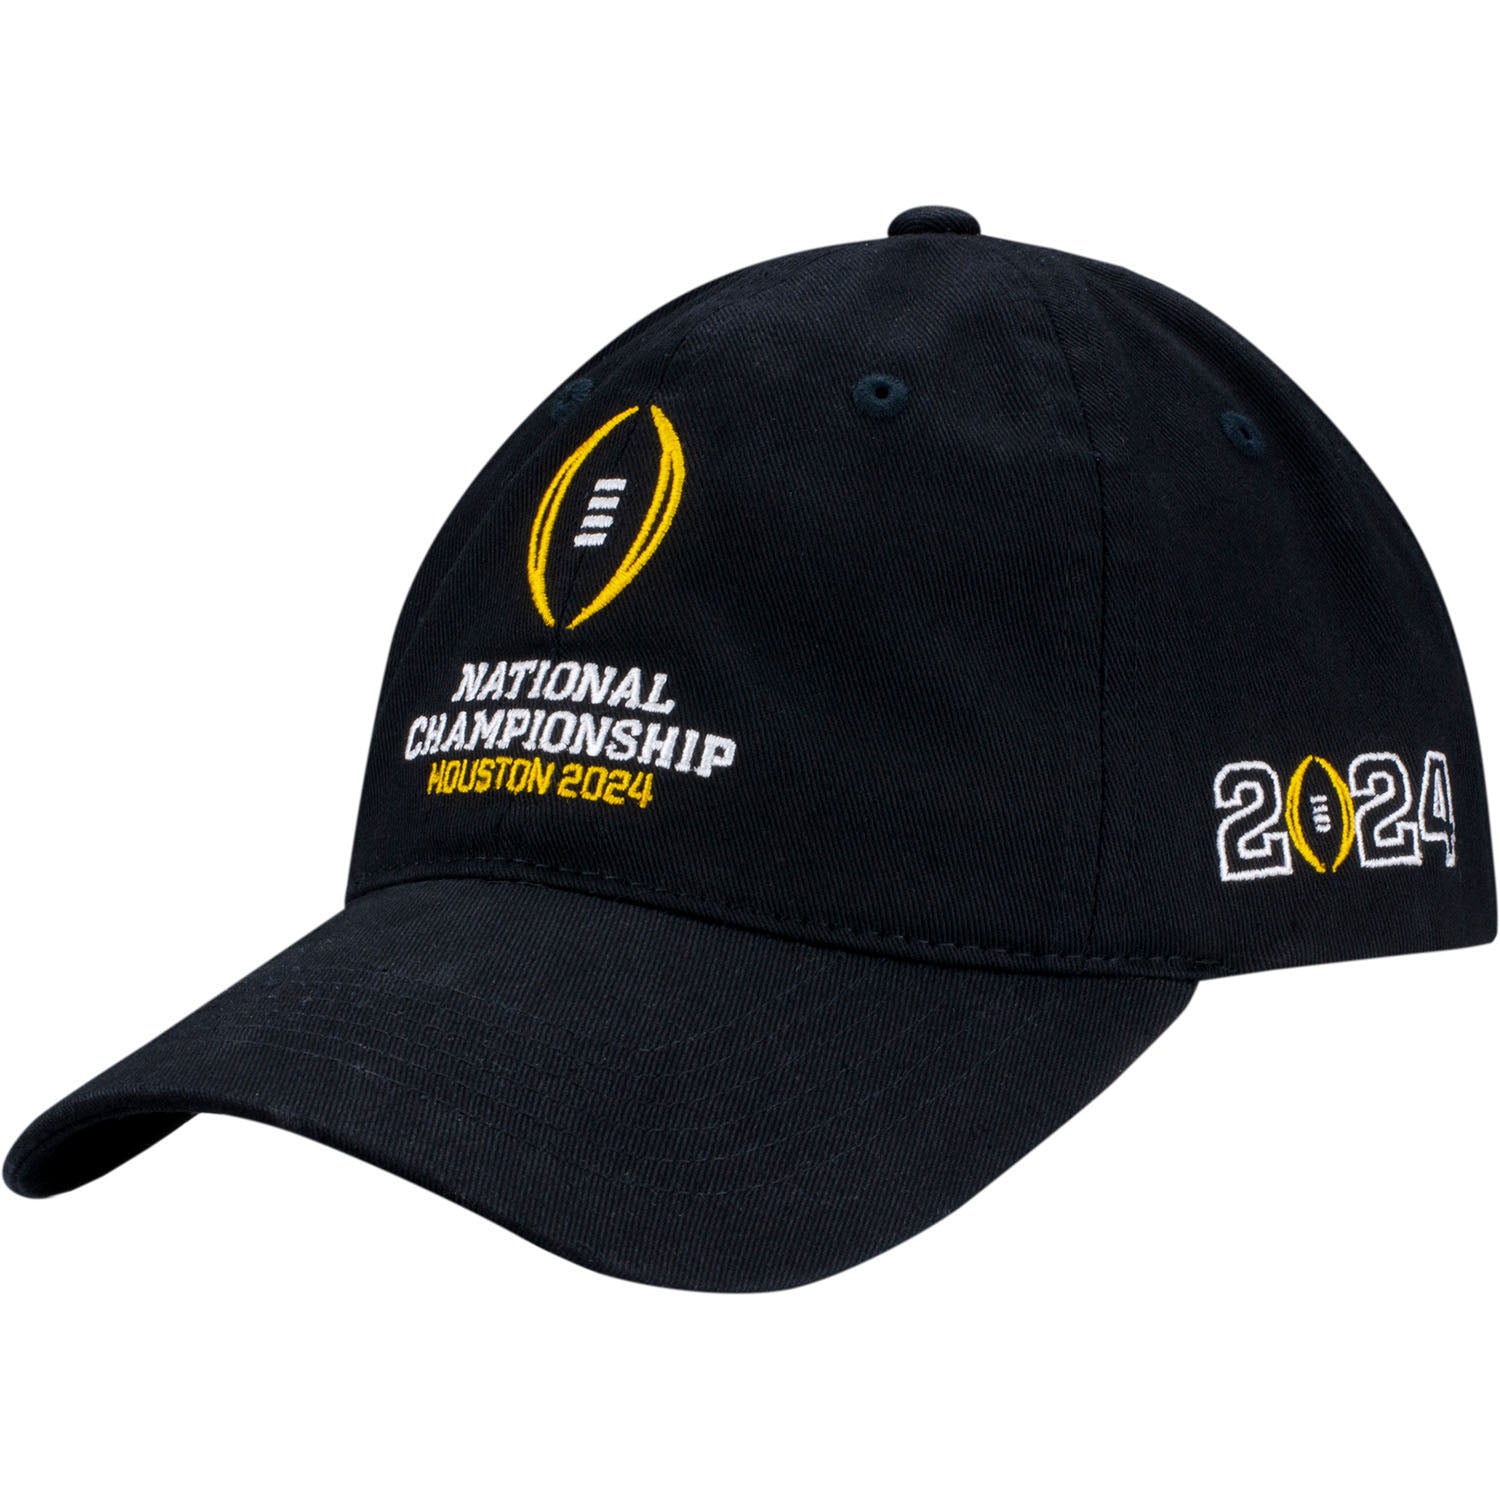 College Football Playoff Shop